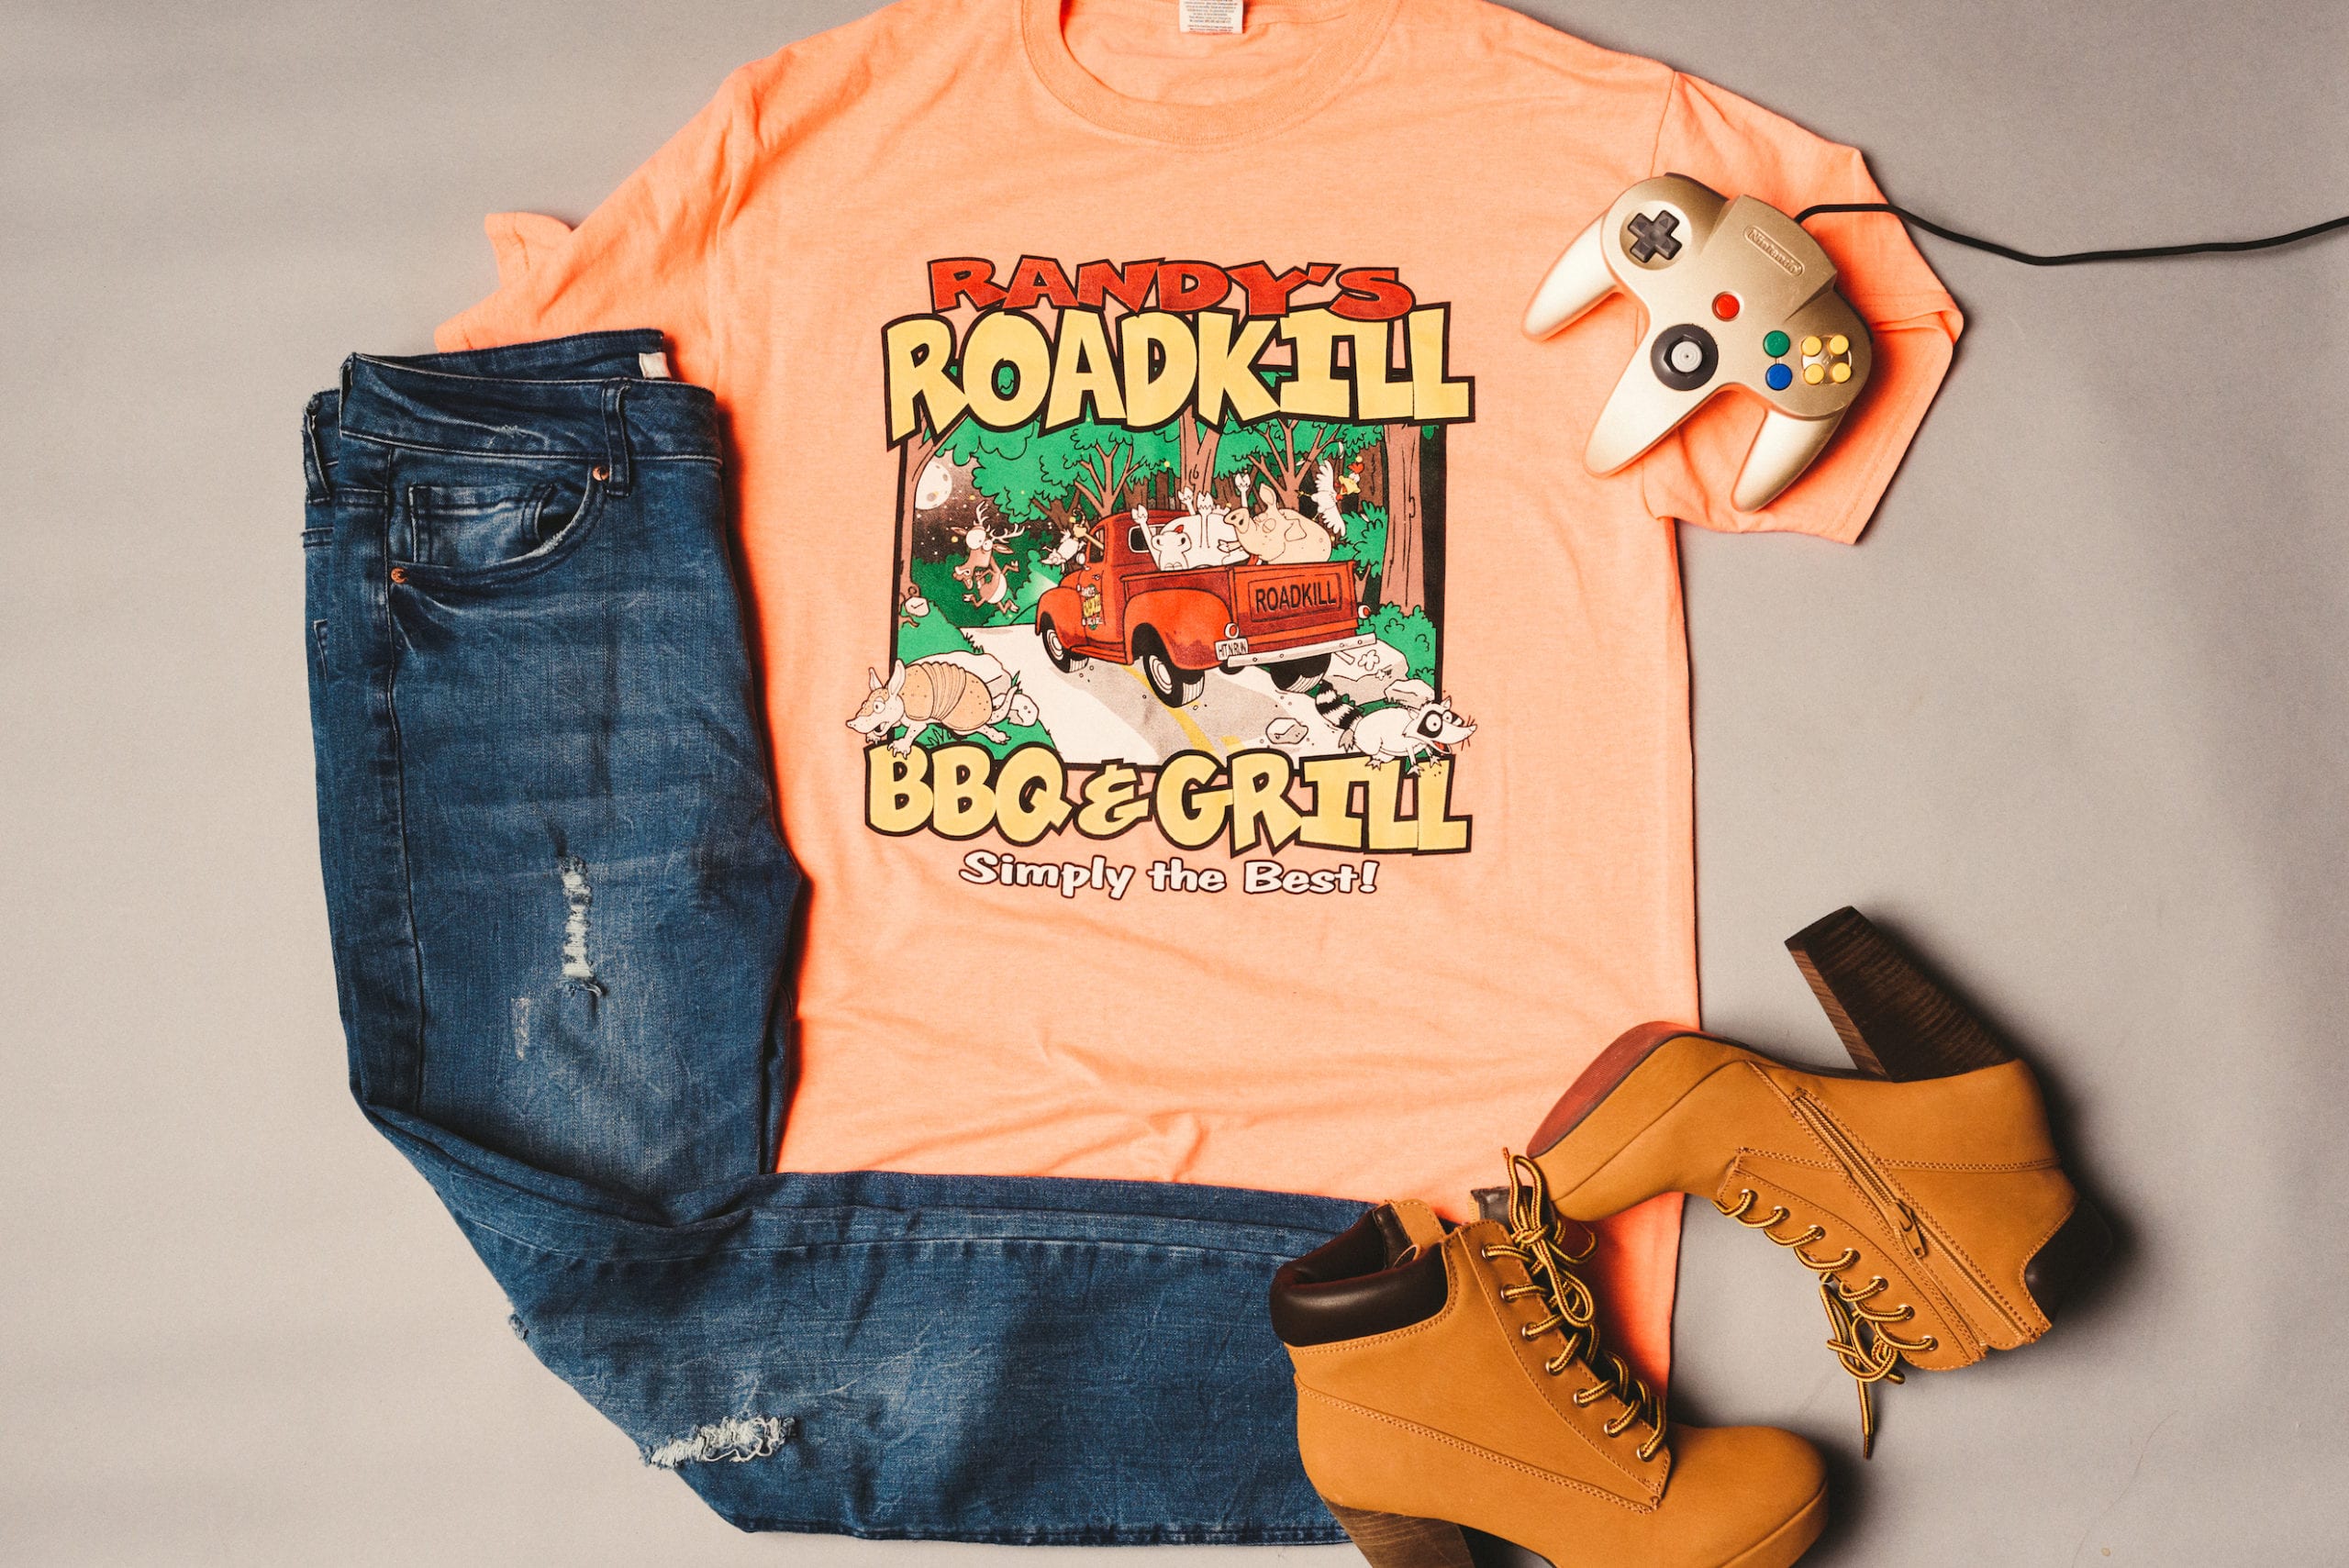 IU C&I Studios Portfolio Heart Piece Media Day Orange Randy's Roadkill BBQ & Grill t shirt with jeans and leather high heel boots along with Nintendo controller on display